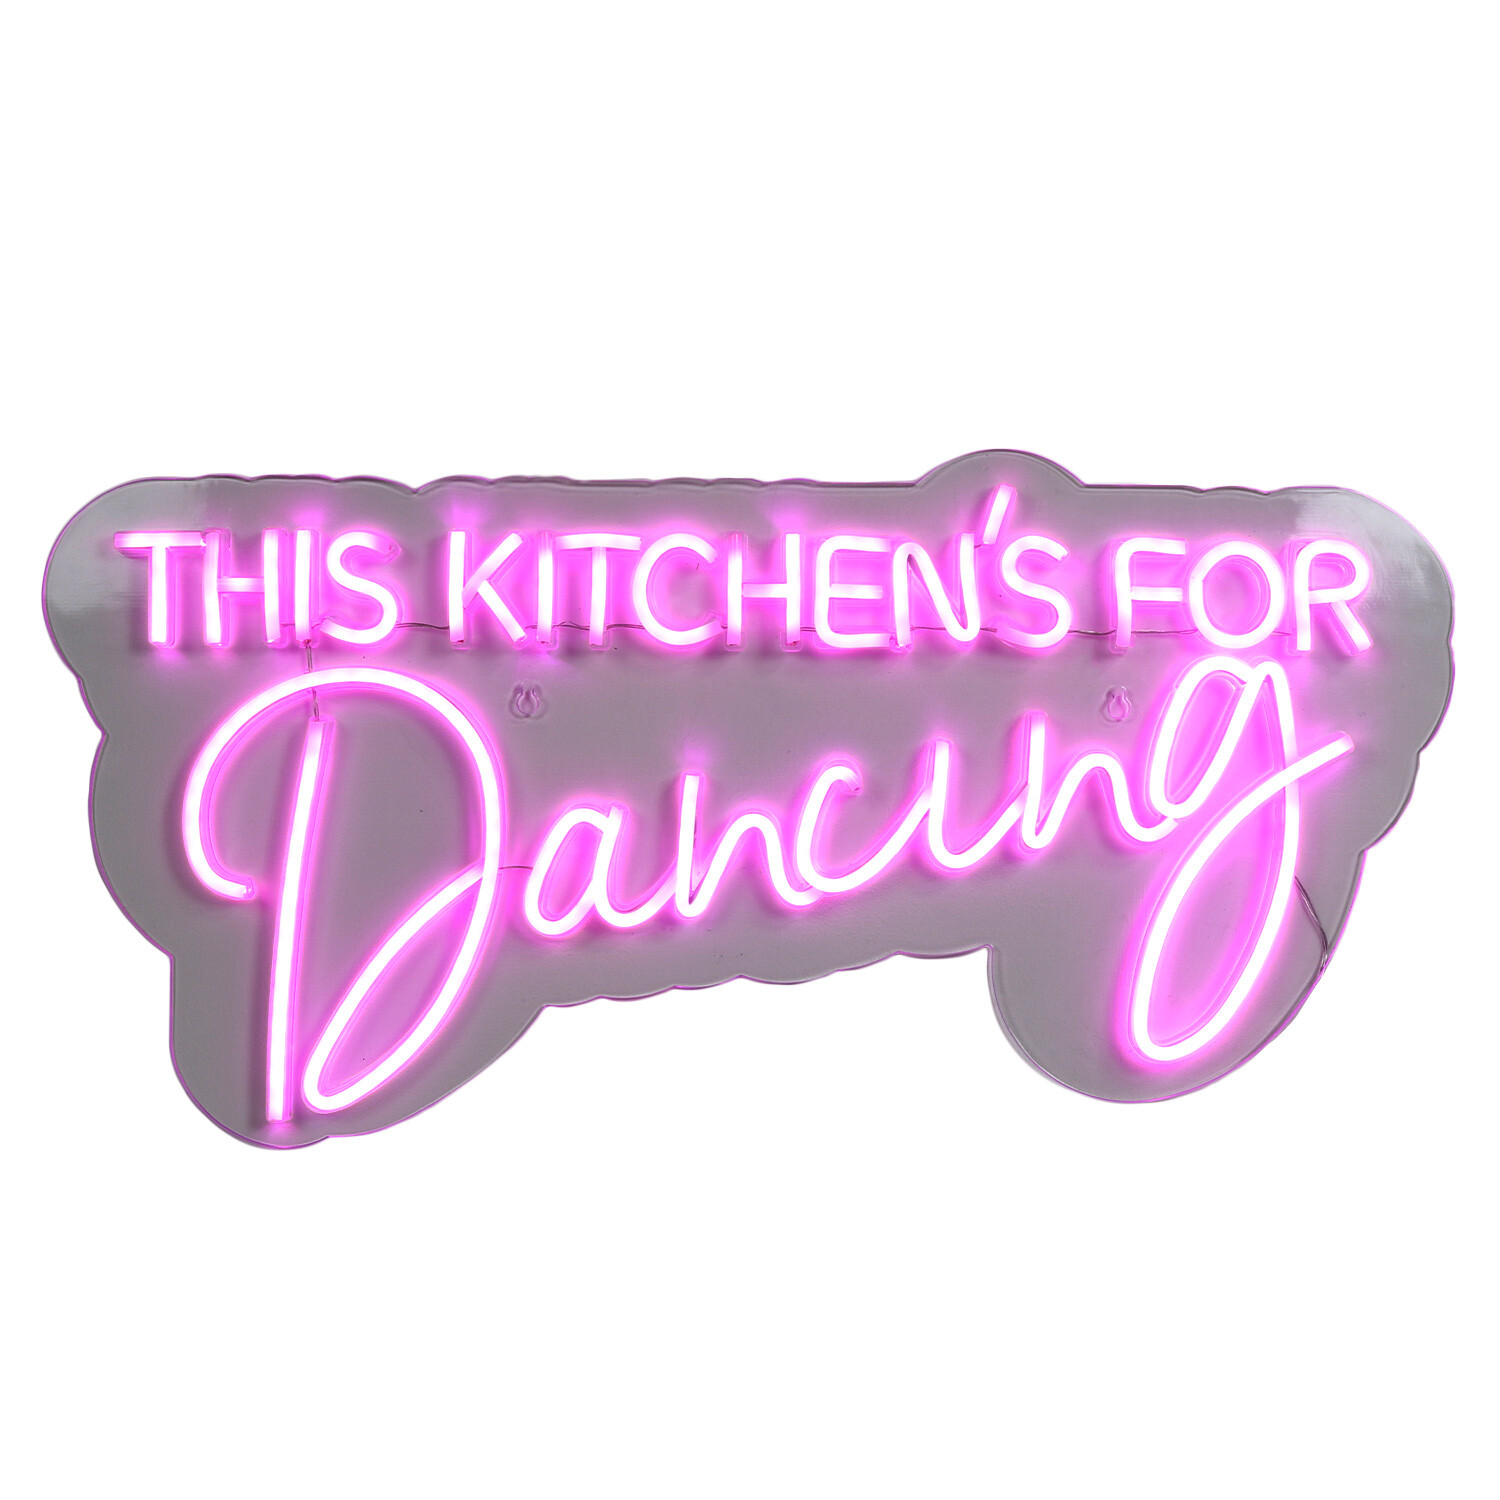 The Kitchens For Dancing LED Neon Sign Light Image 1